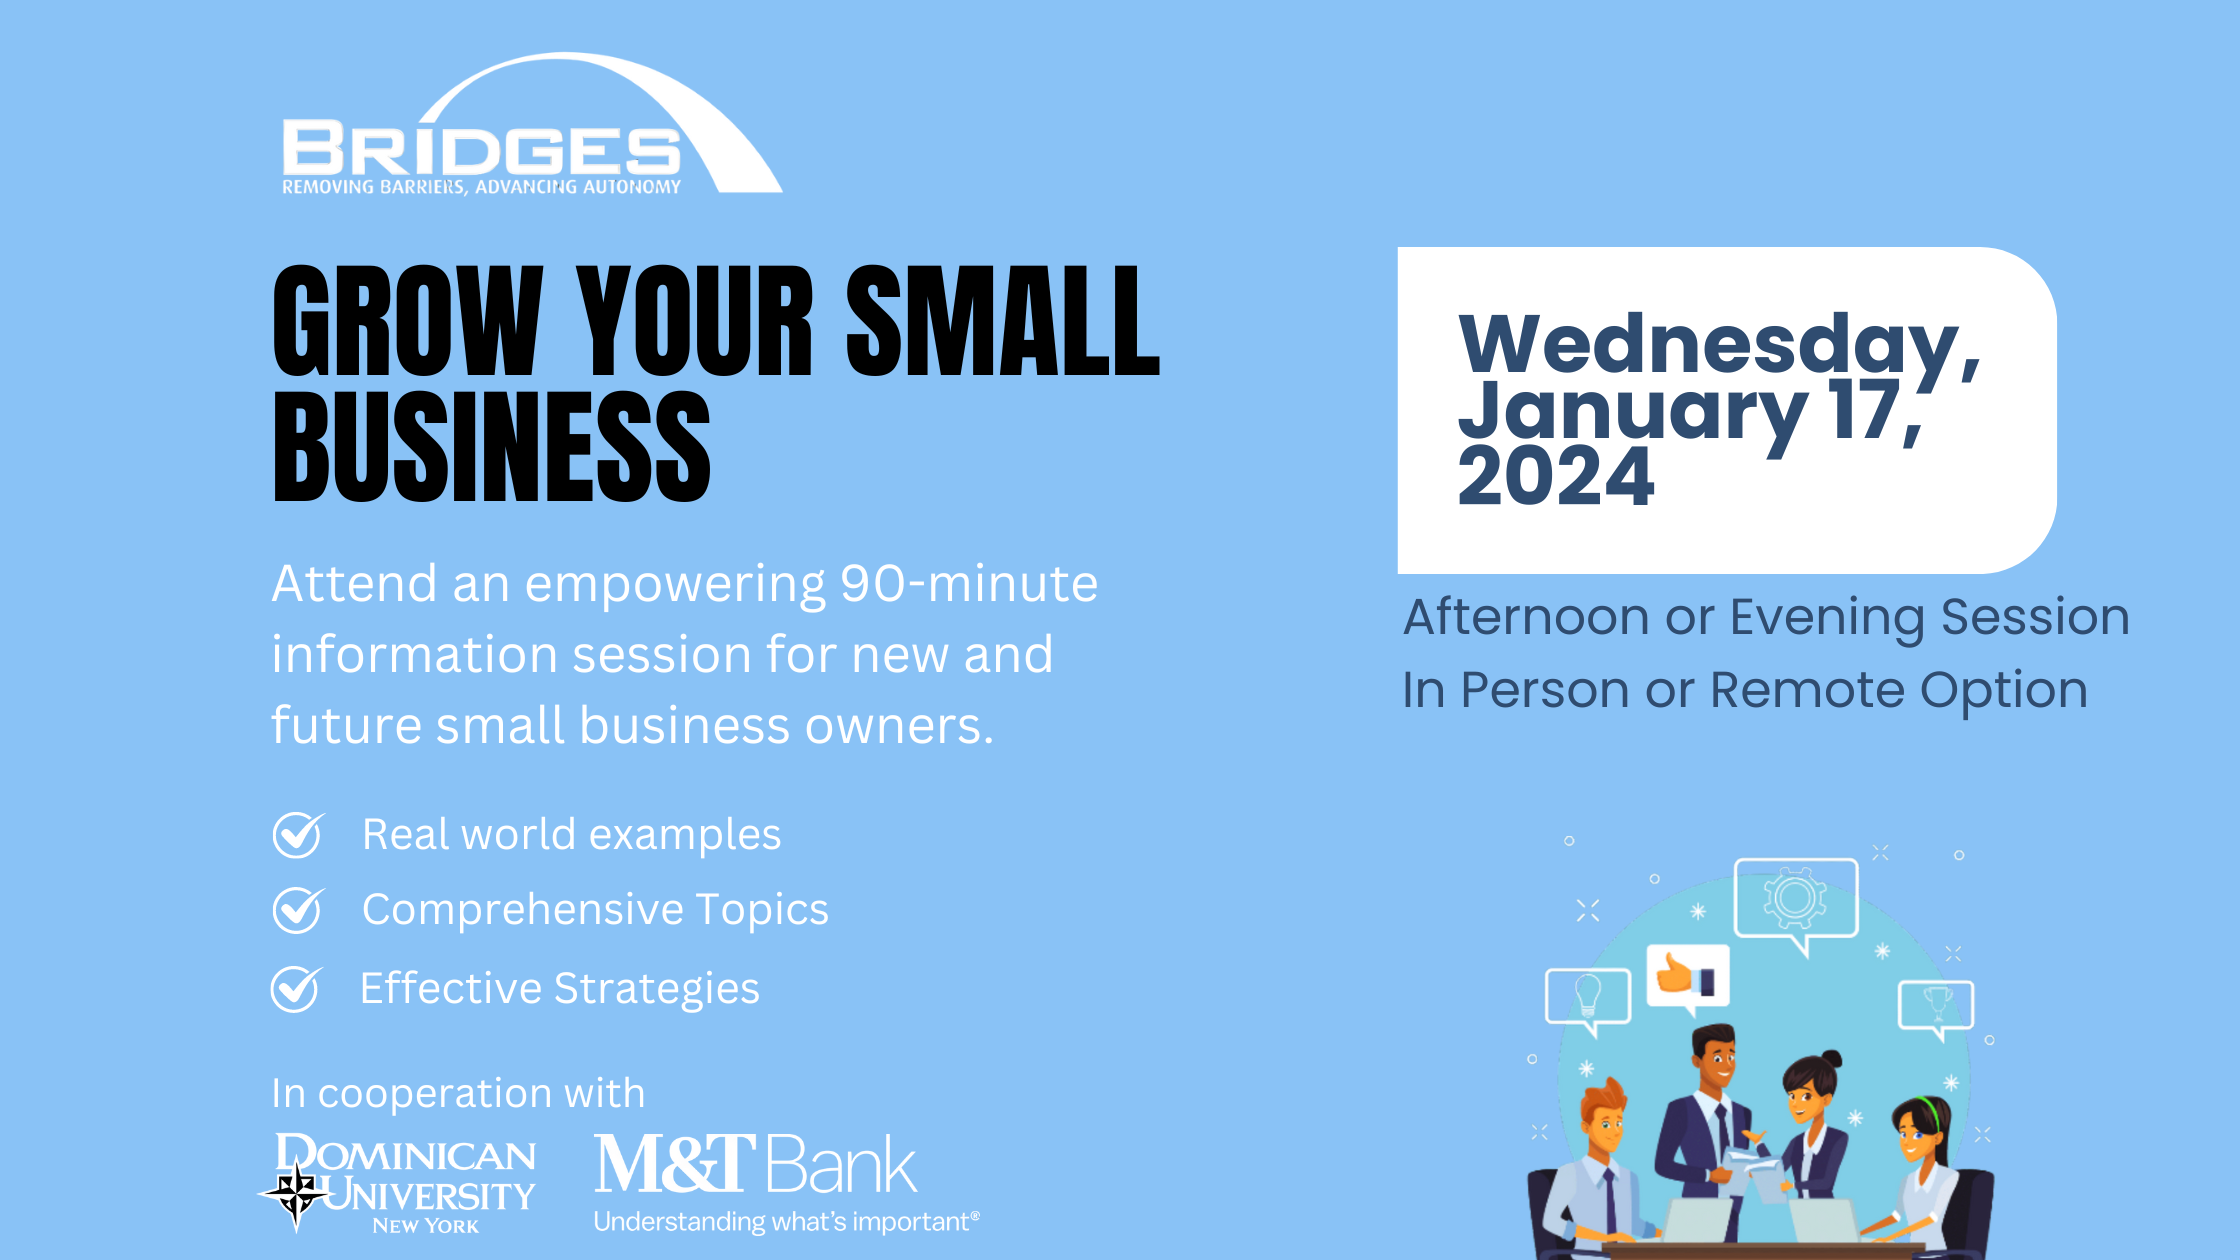 Grow your small business. Wednesday, January 17, 2024. Afternoon or evening session in person or remote option. Attend an empowering seminar for small business owners. Real world examples, comprehensive topics, and effective strategies. In cooperation with Dominican University New York and M&T Bank.